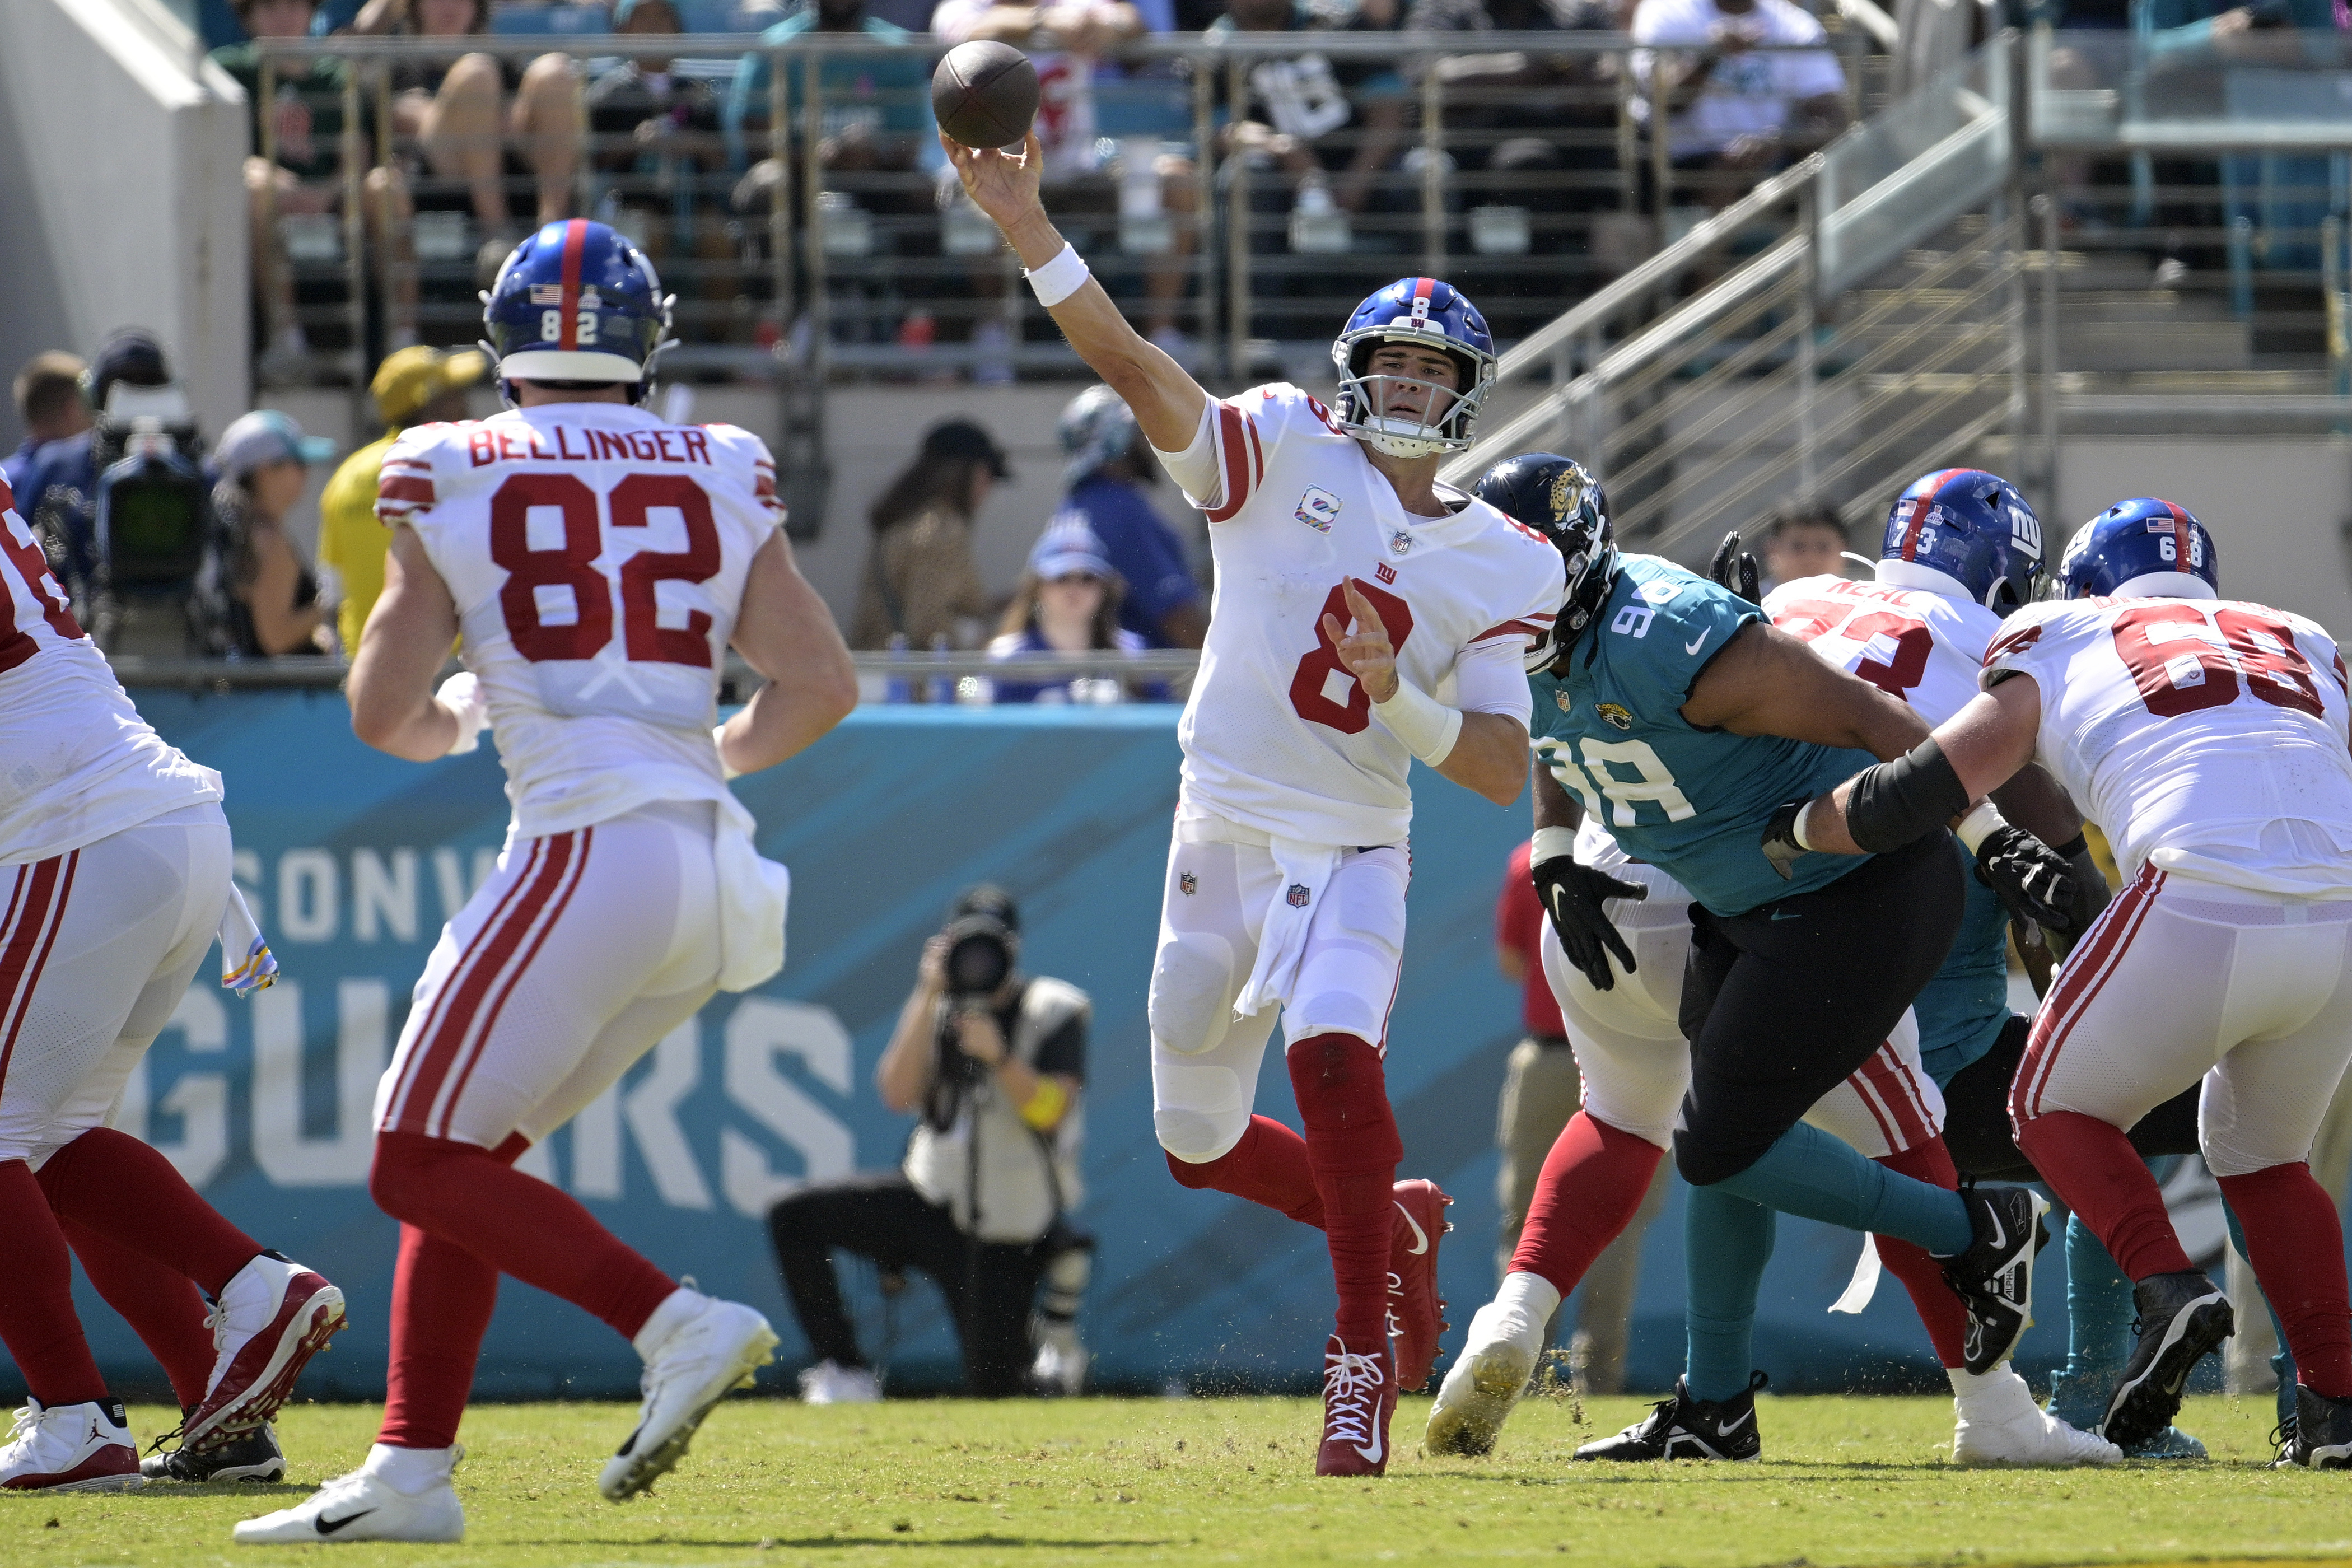 How to Watch Giants vs. Seahawks: Time, TV Channel and Live Stream – Week 4